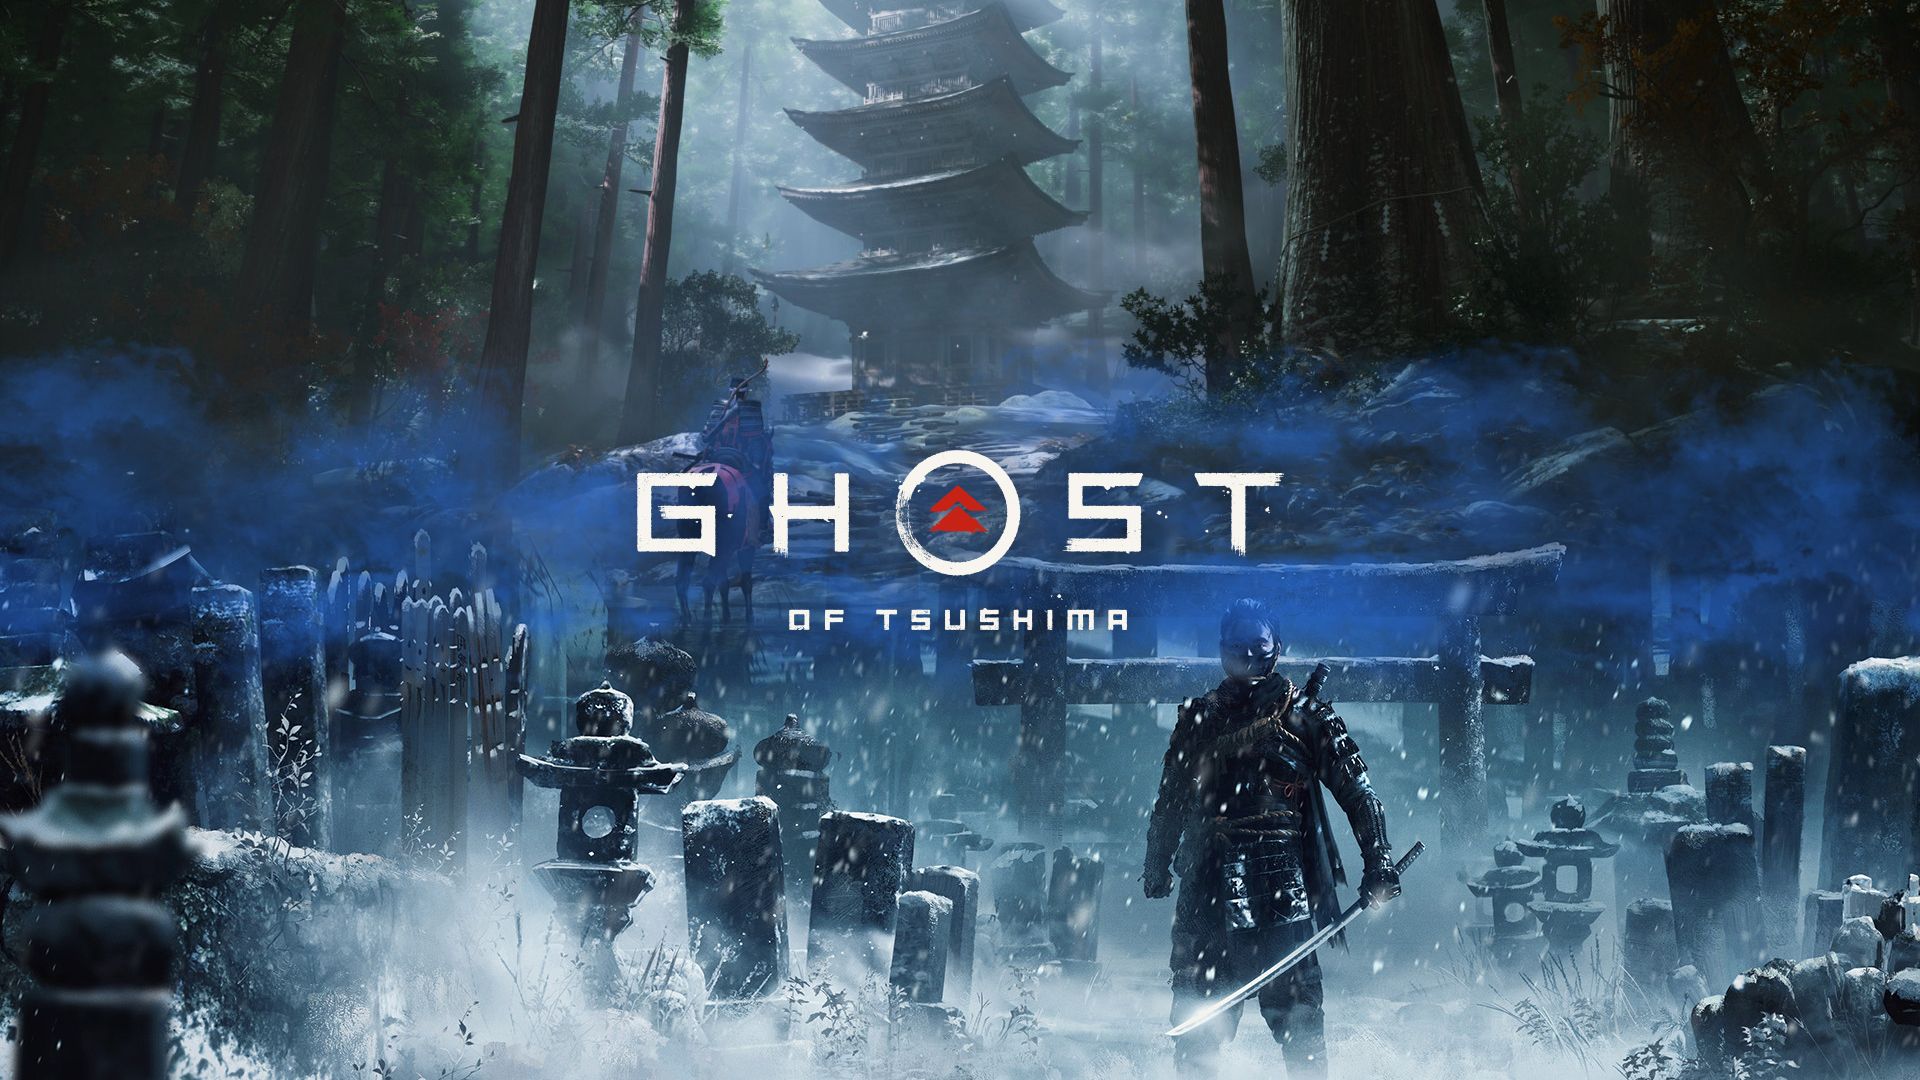 The Ghost of Tsushima (PS4) won't always be faithful to historical